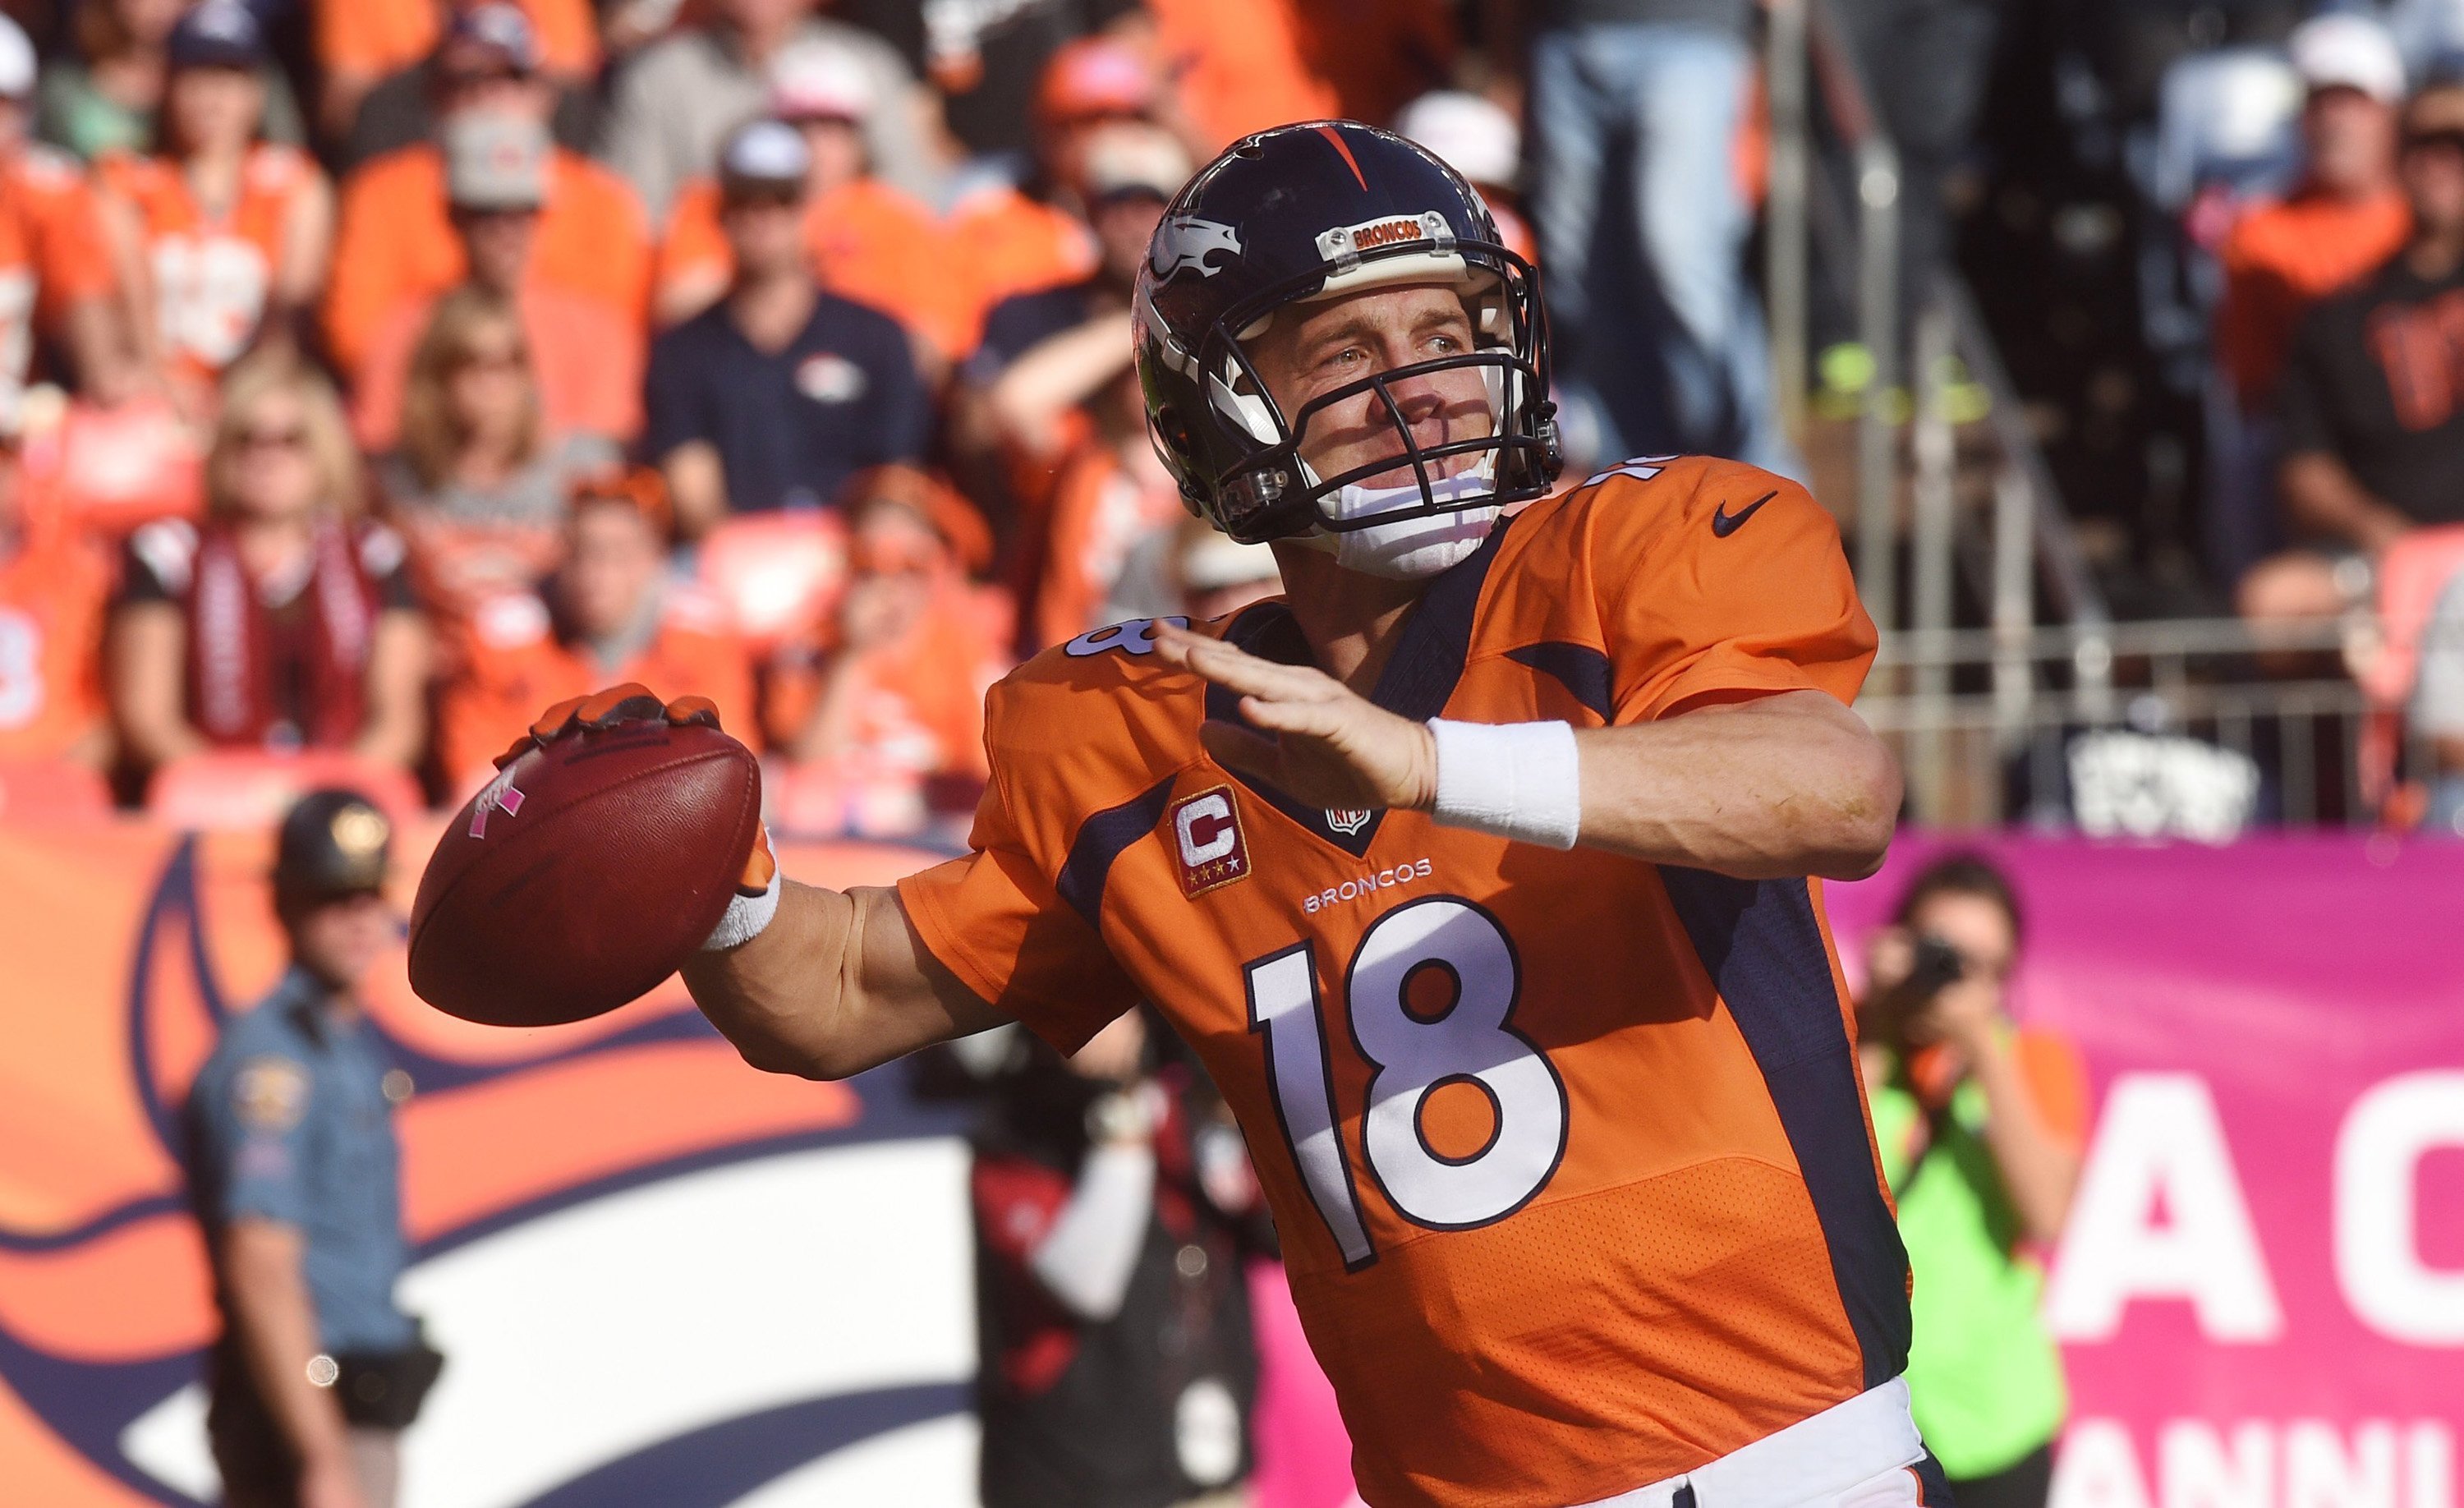 Denver Broncos quarterback Peyton Manning throws the ball during the third quarter of a game between the Denver Broncos and Arizona Cardinals on Sunday. Manning notched his 500th career touchdown pass in the game. Photo: MCT